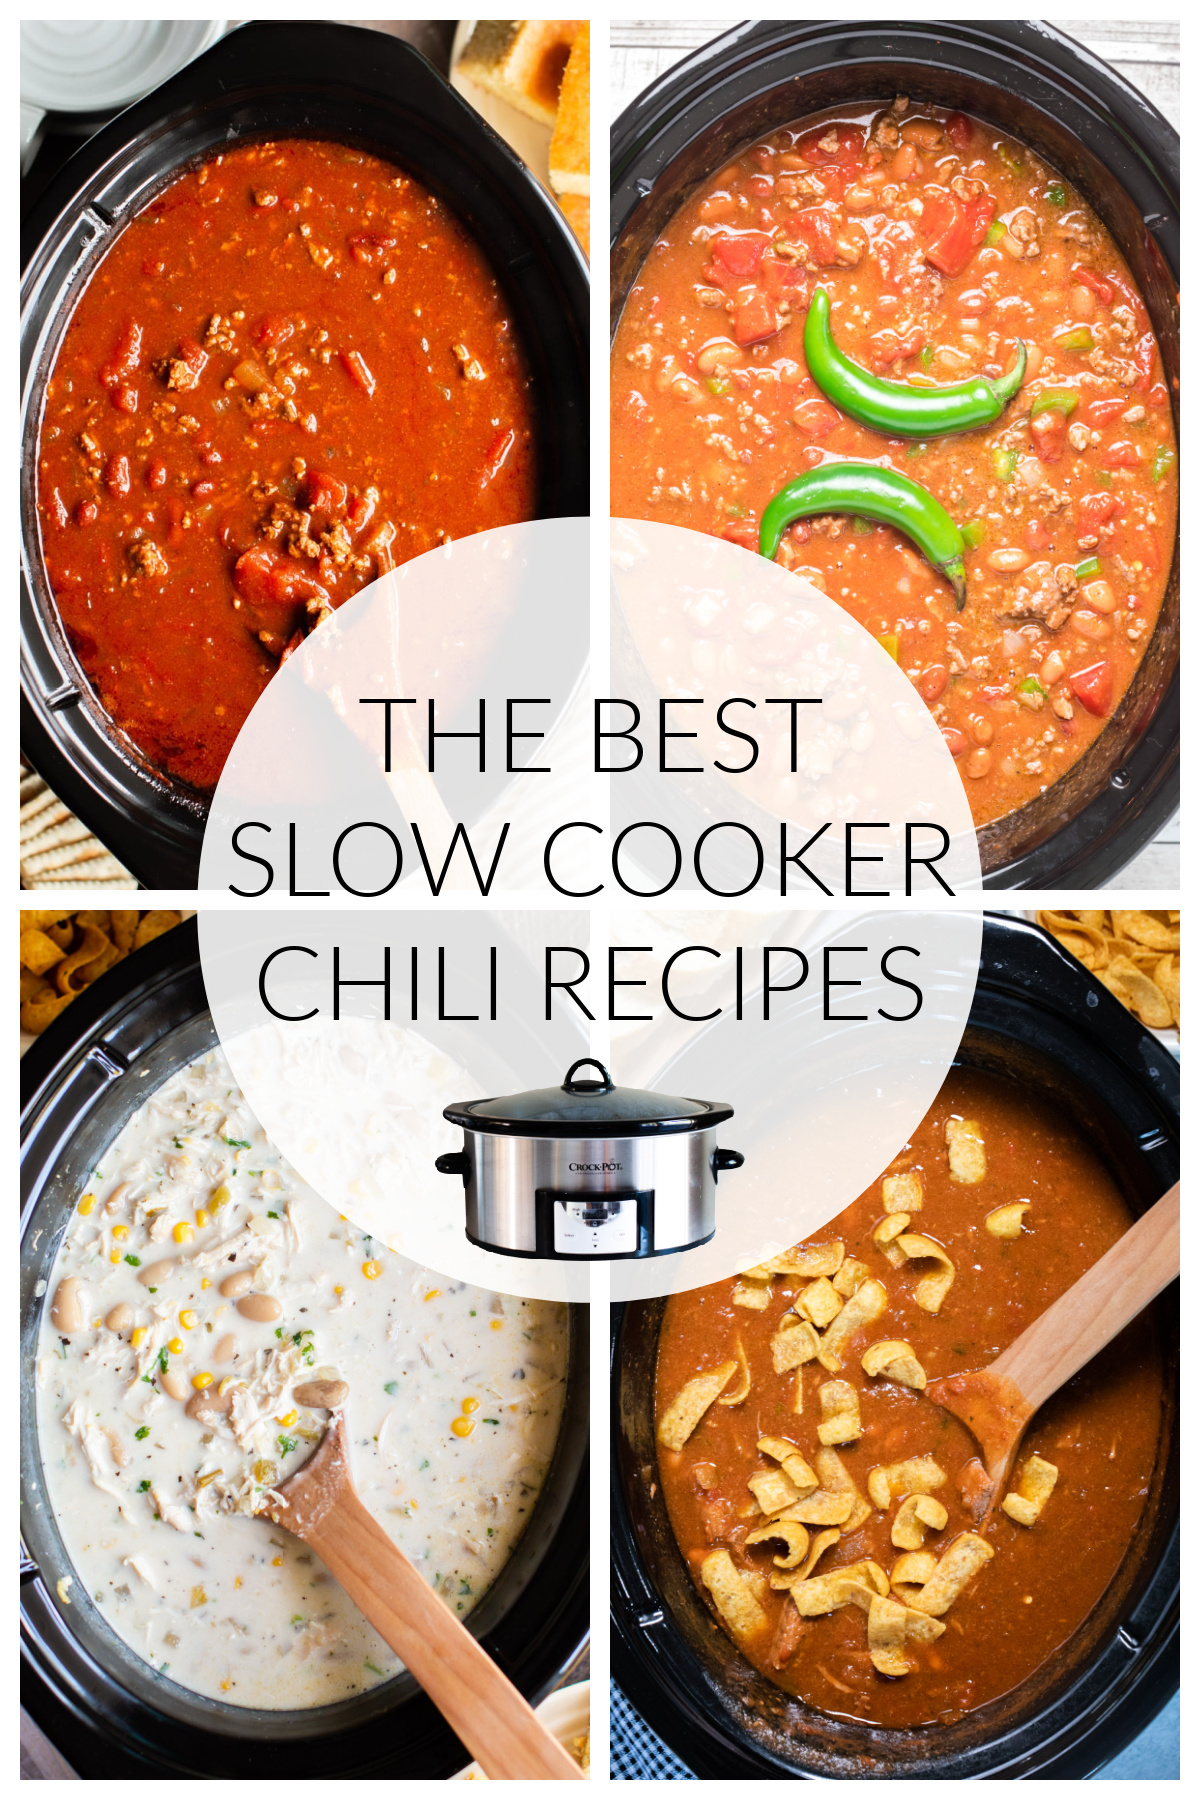 4 images of chili in slow cooker with text overlay.